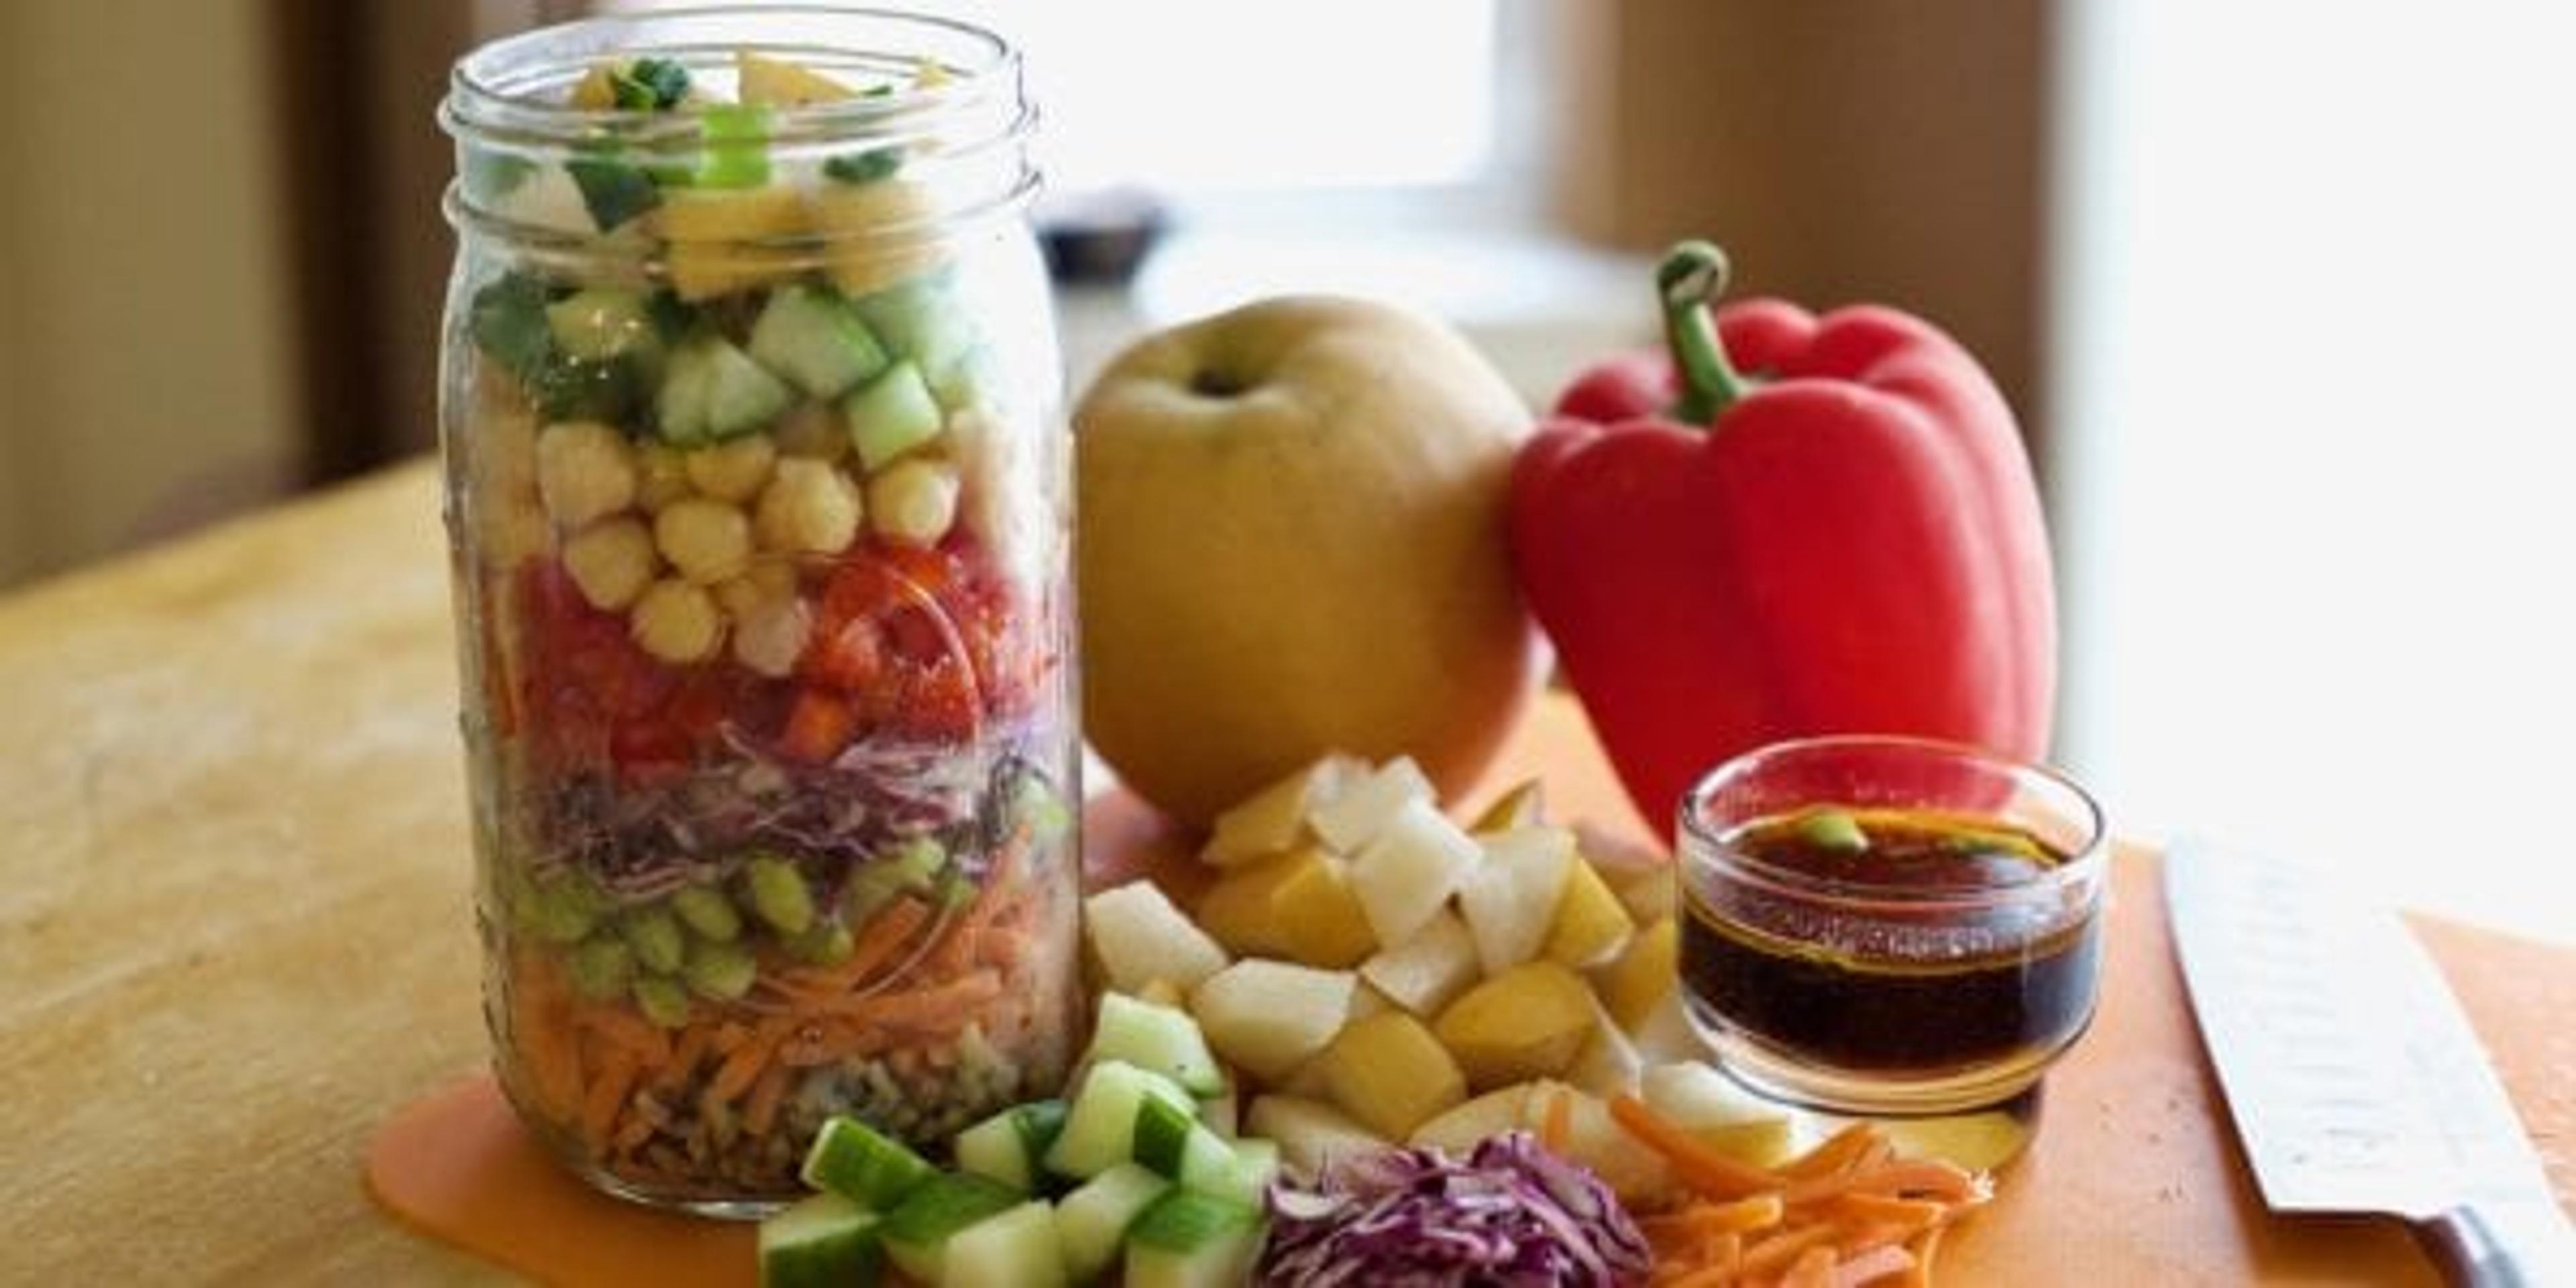 Mason jar filled with vegetables on table